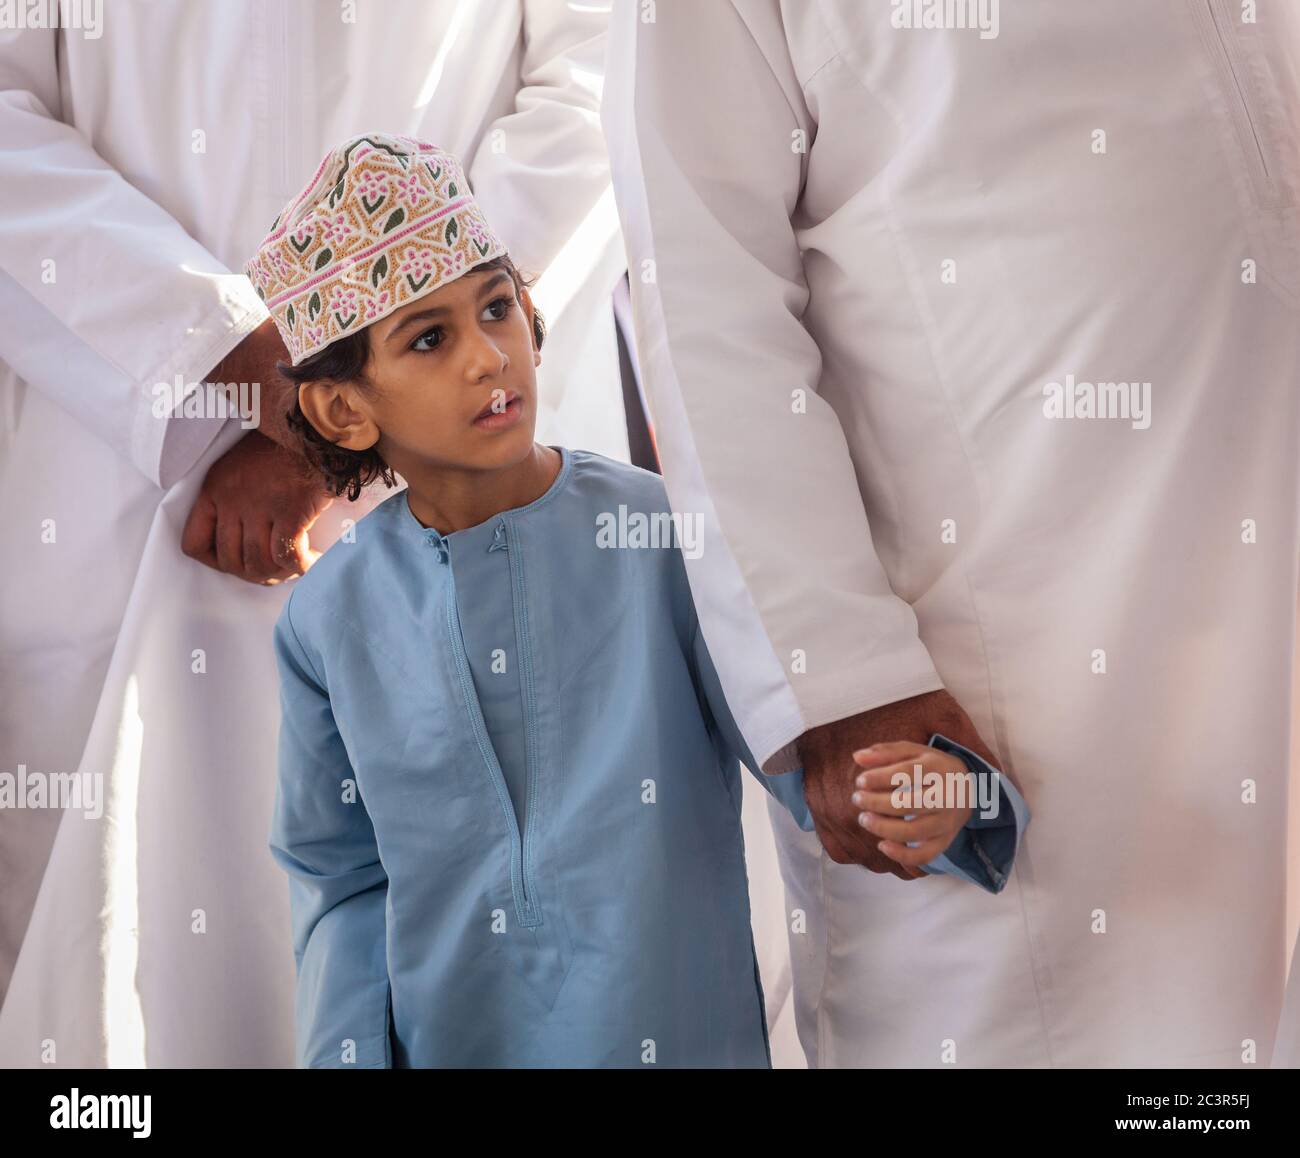 Nizwa, Oman, December 2, 2016: Portrait of a local boy in traditional clothes at the Friday goat market in Nizwa, Oman Stock Photo